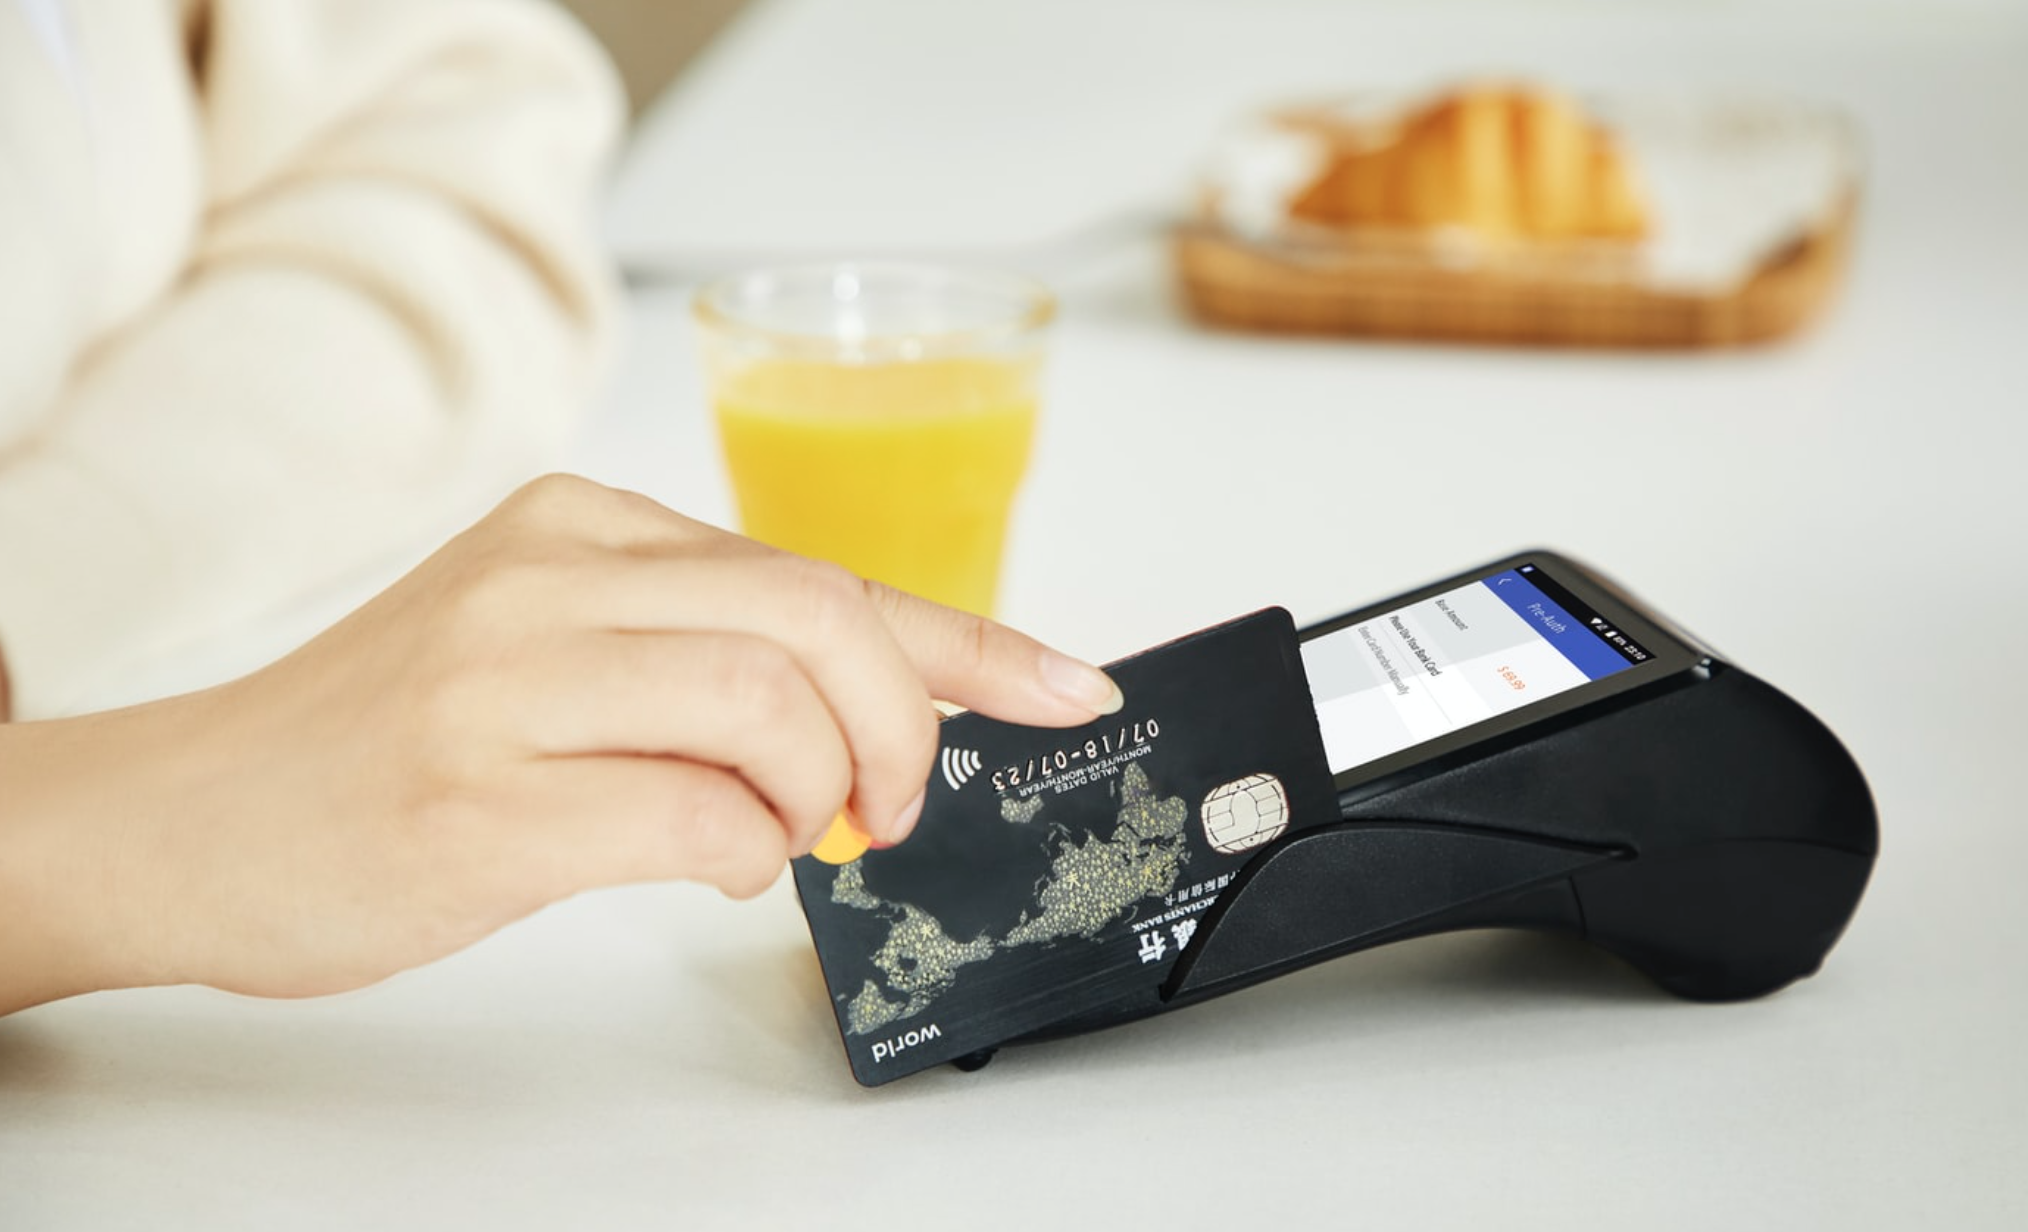 5 Purchases You Should Think Twice About Putting on Your Credit Card